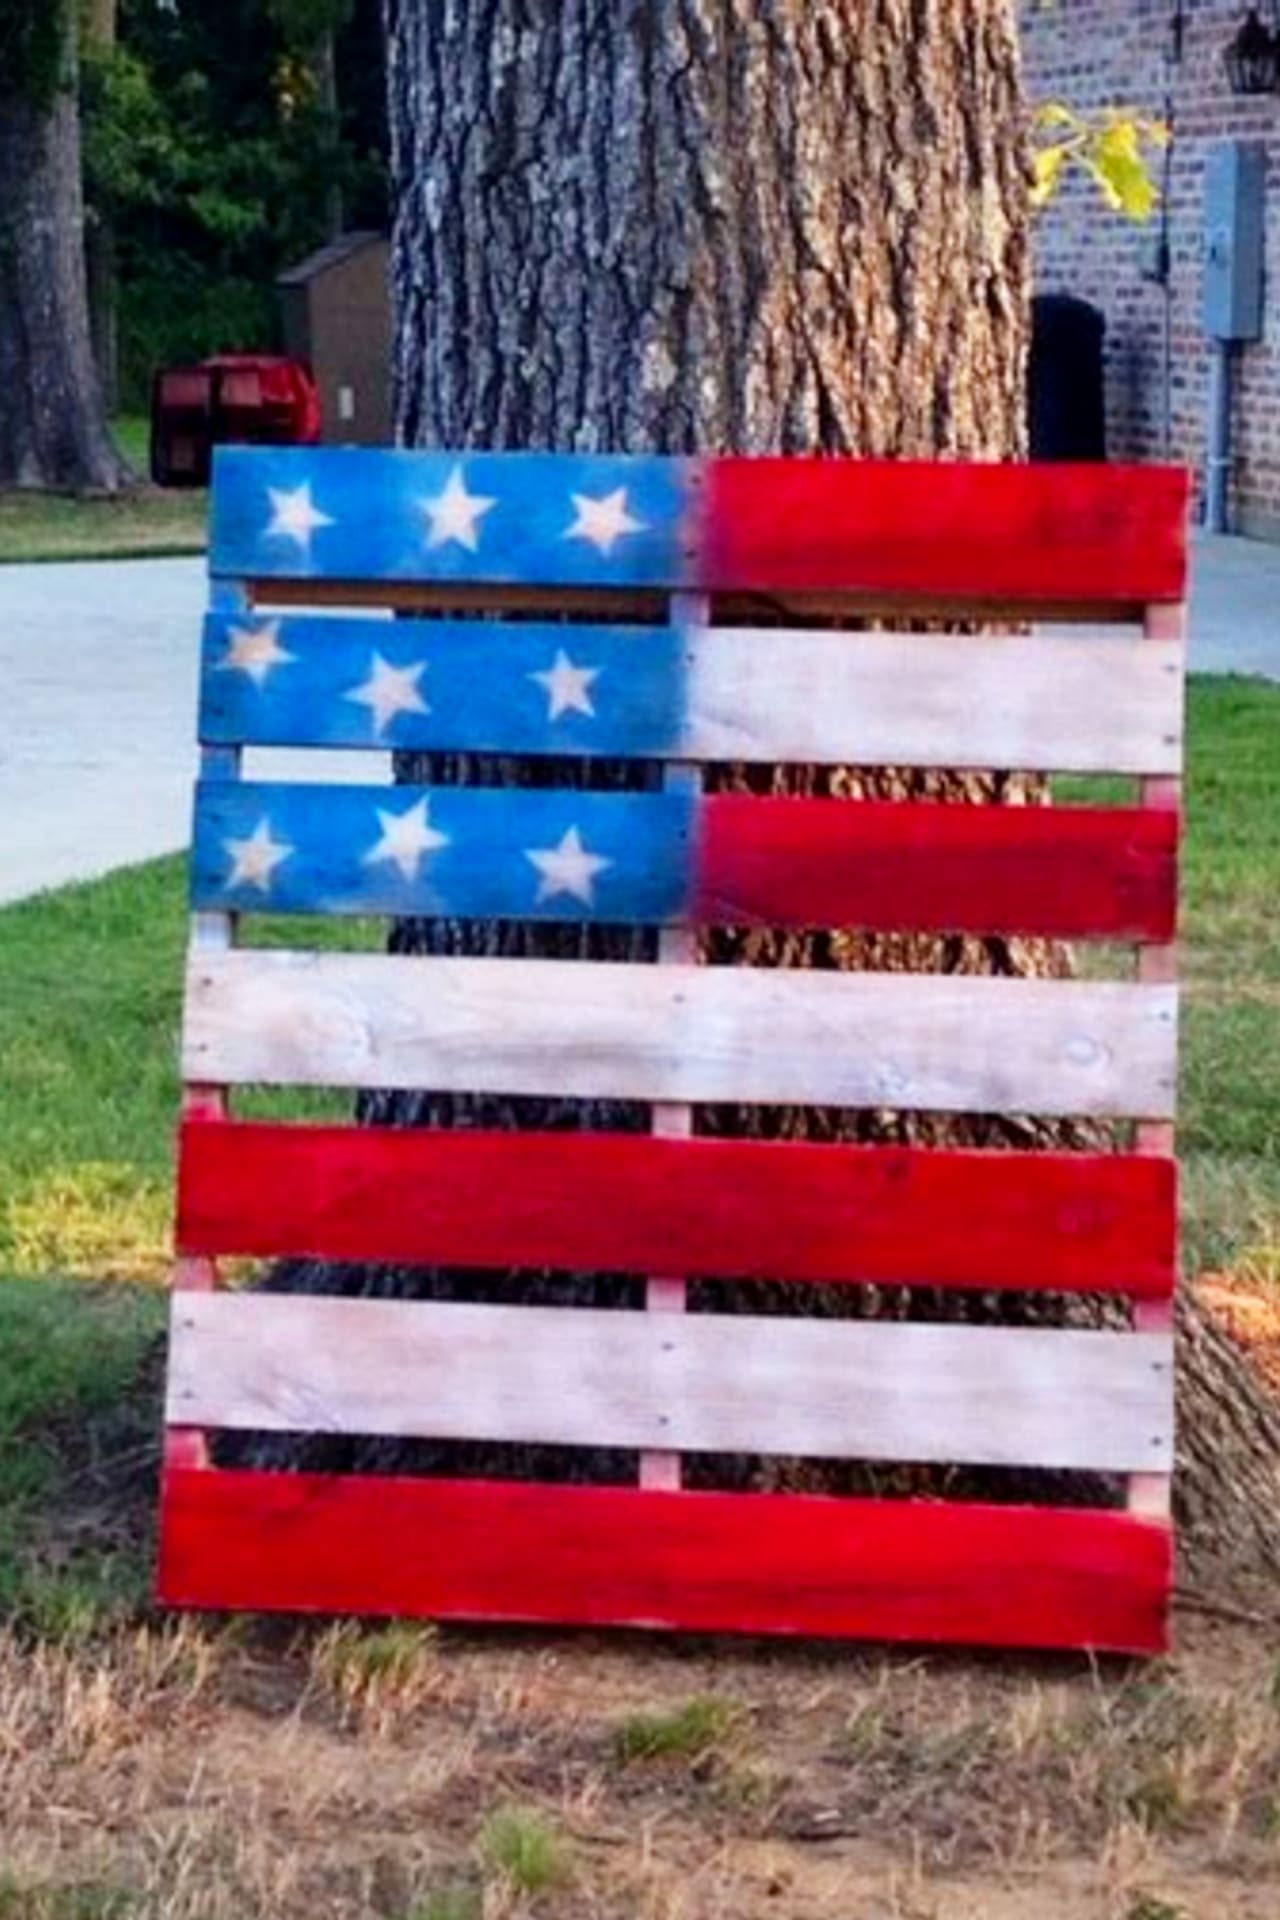 4th of July party ideas - yard decorations for a 4th of July party